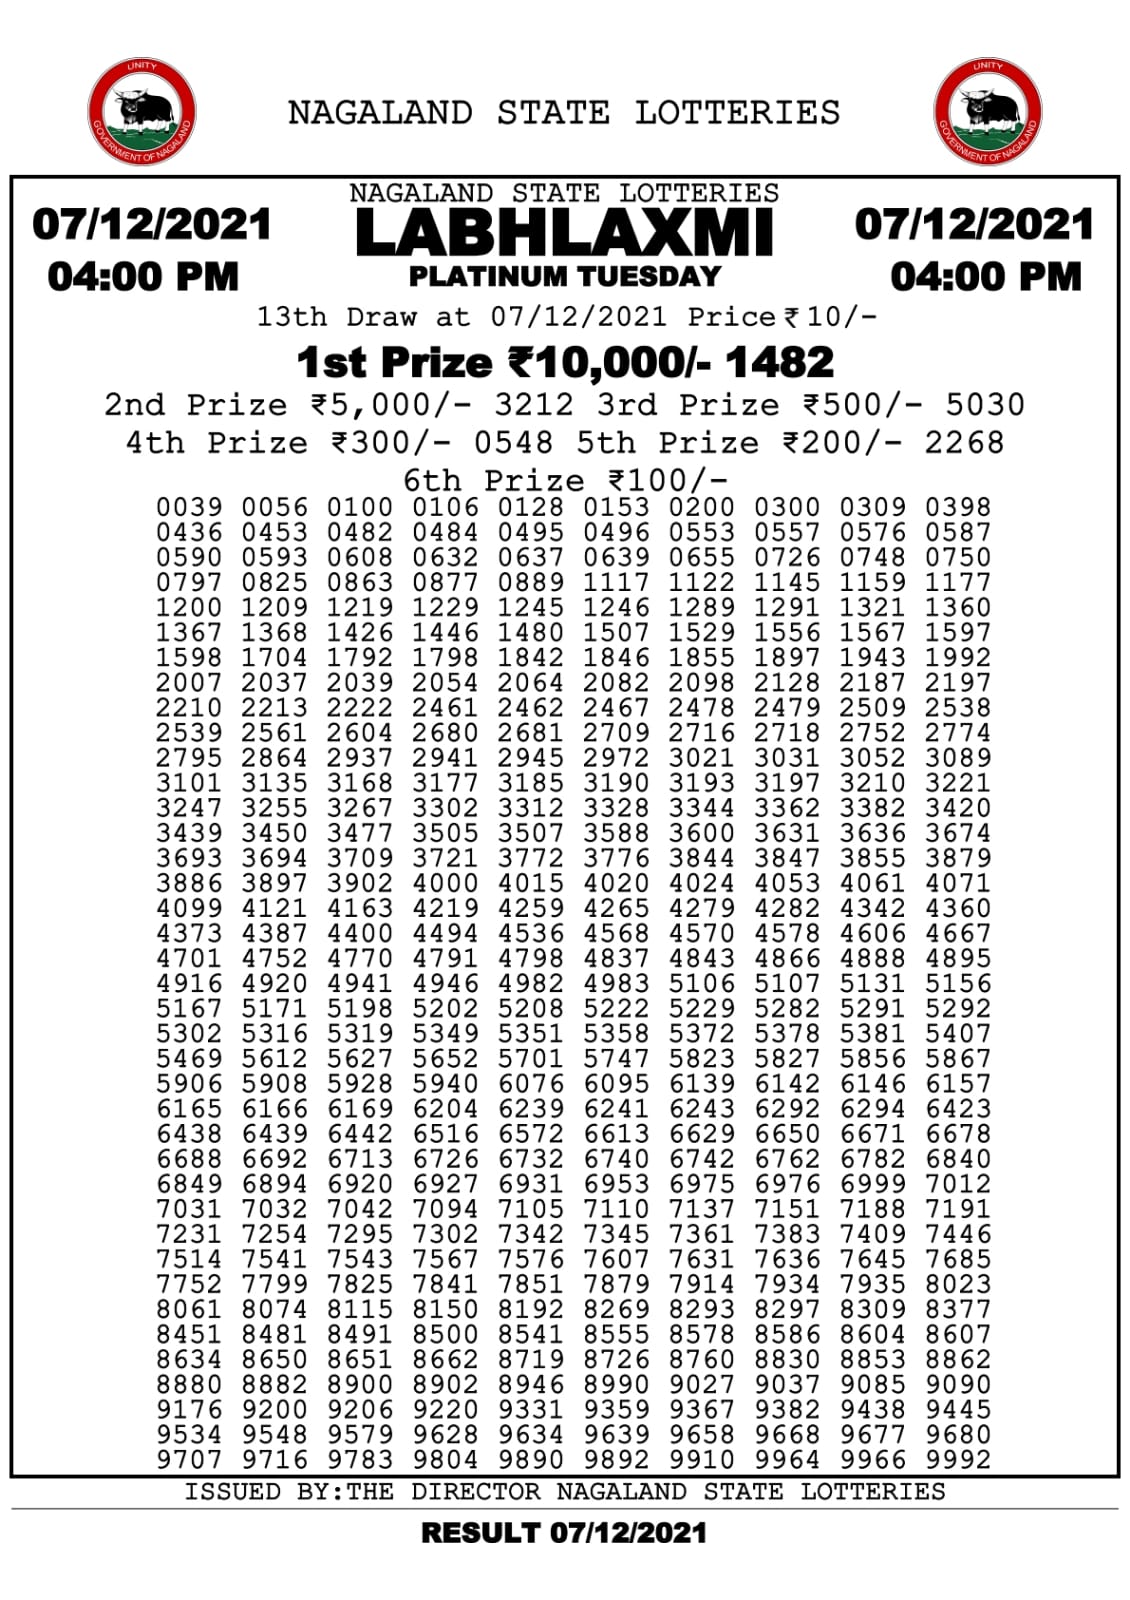 Labhlaxmi 4.00pm Lottery Result 07.12.2021